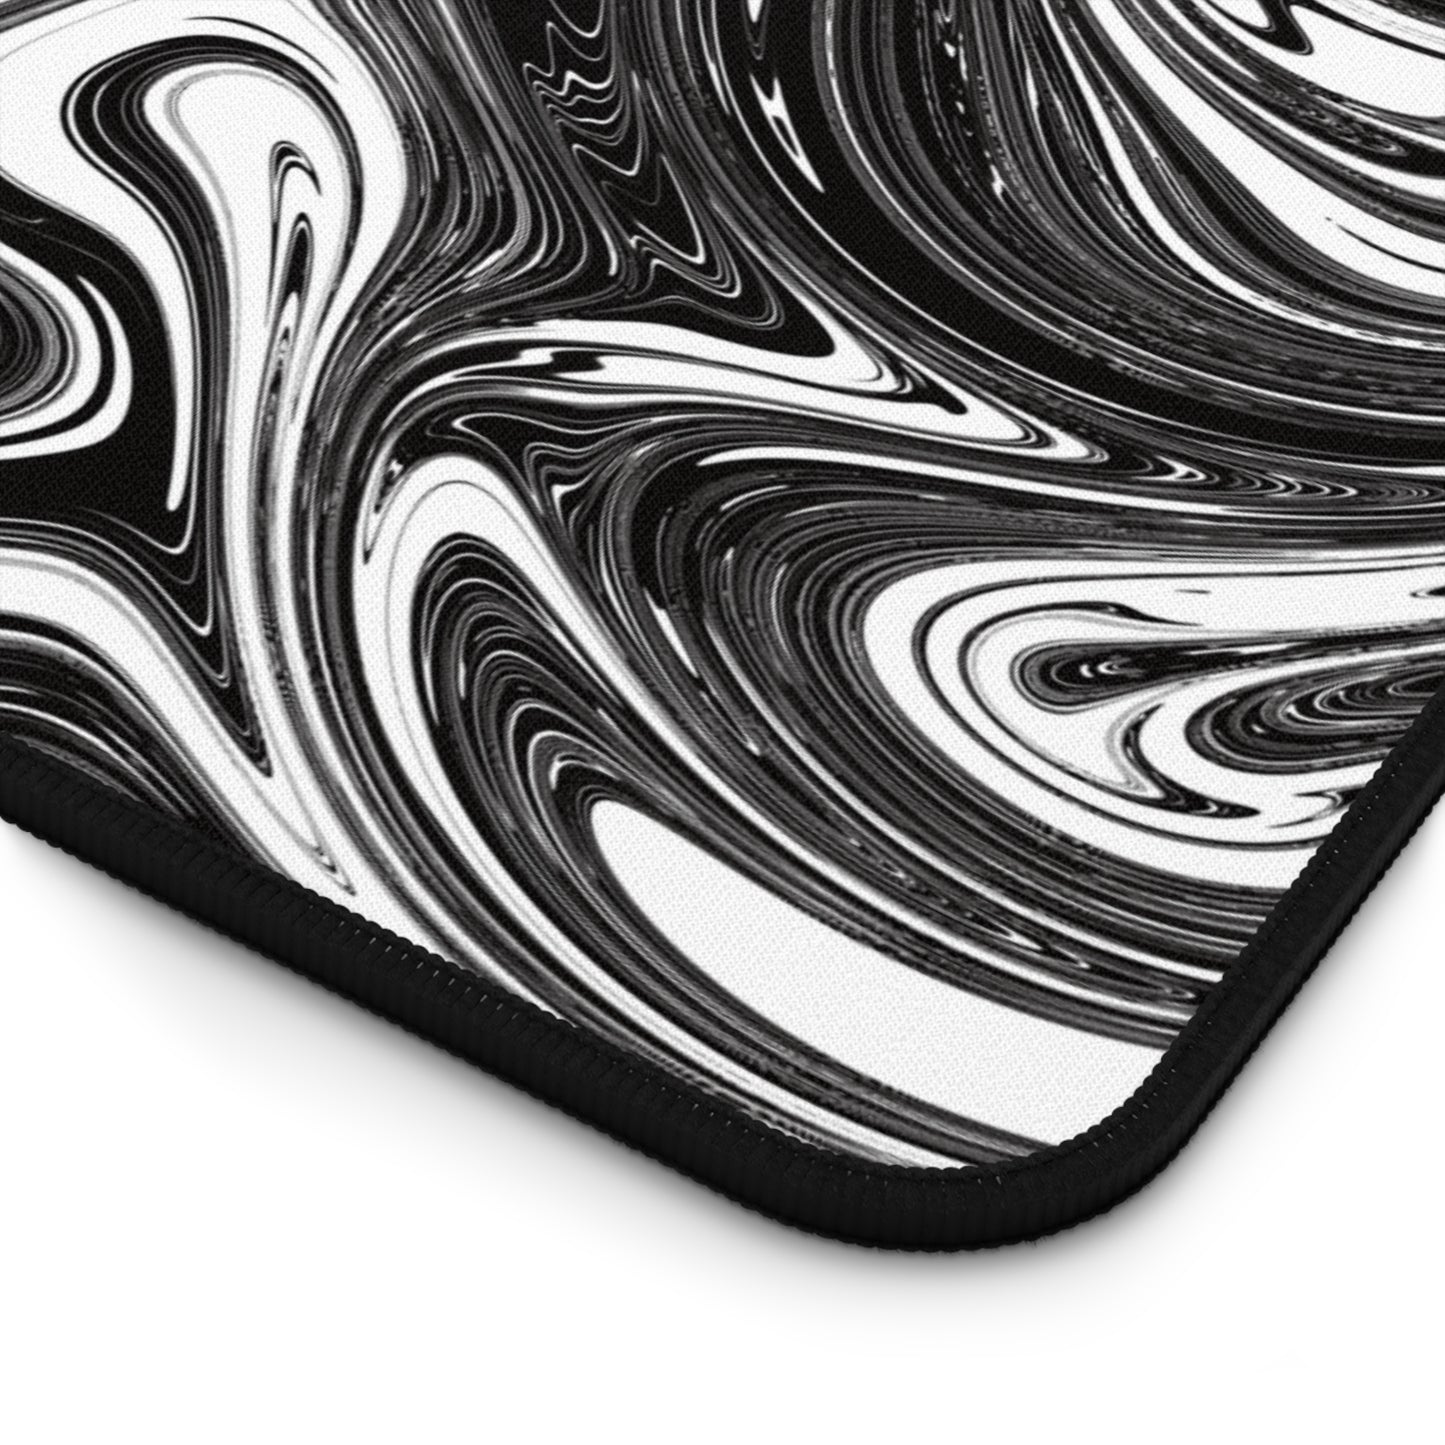 The corner of a 12" x 22" desk mat with black and white swirls.